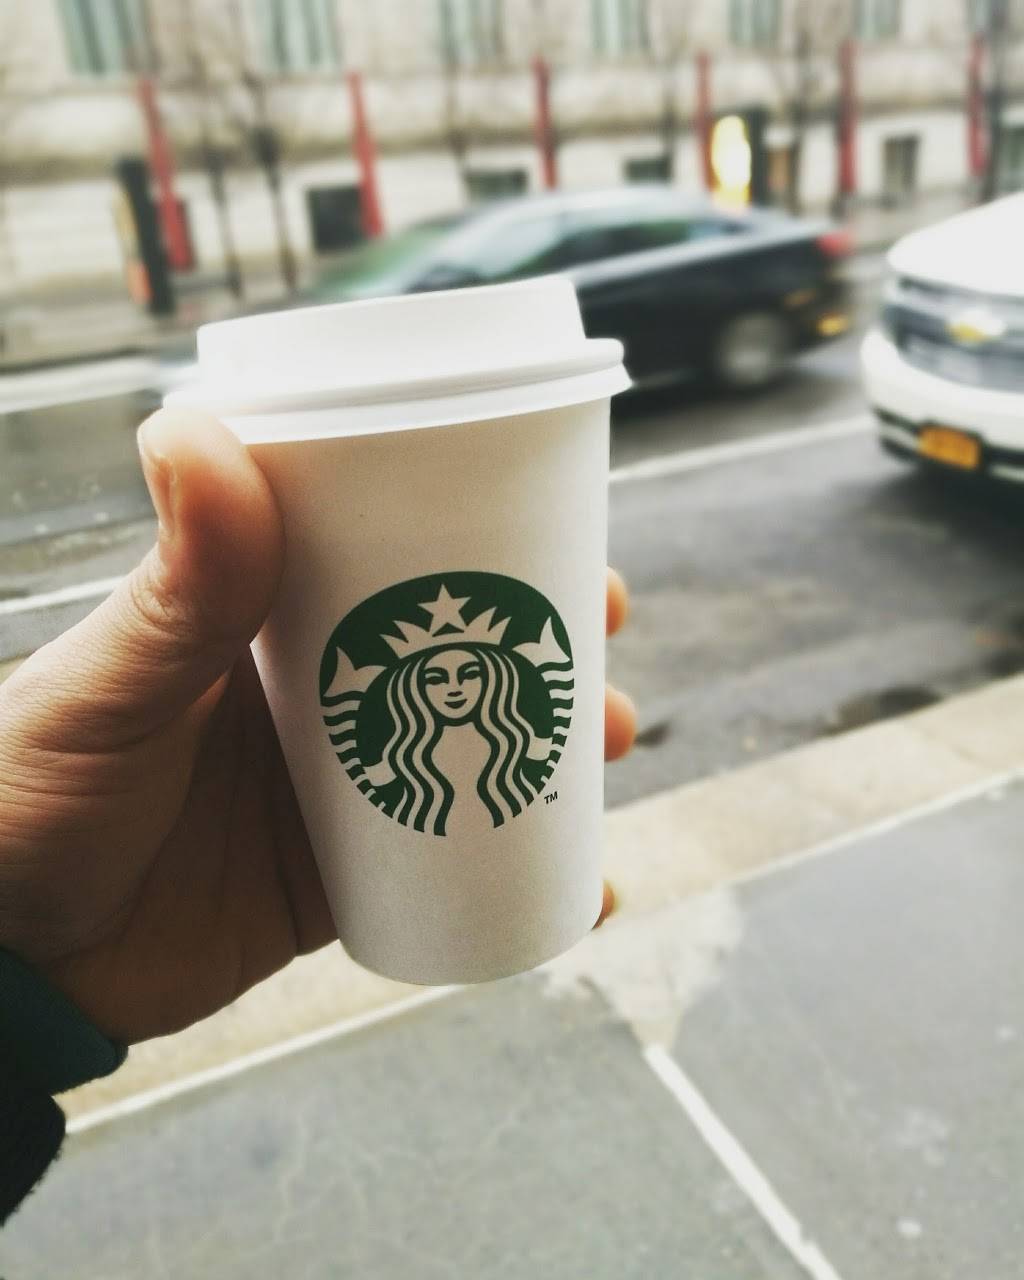 Starbucks | cafe | 1488 3rd Ave #A, New York, NY 10028, USA | 2127447458 OR +1 212-744-7458